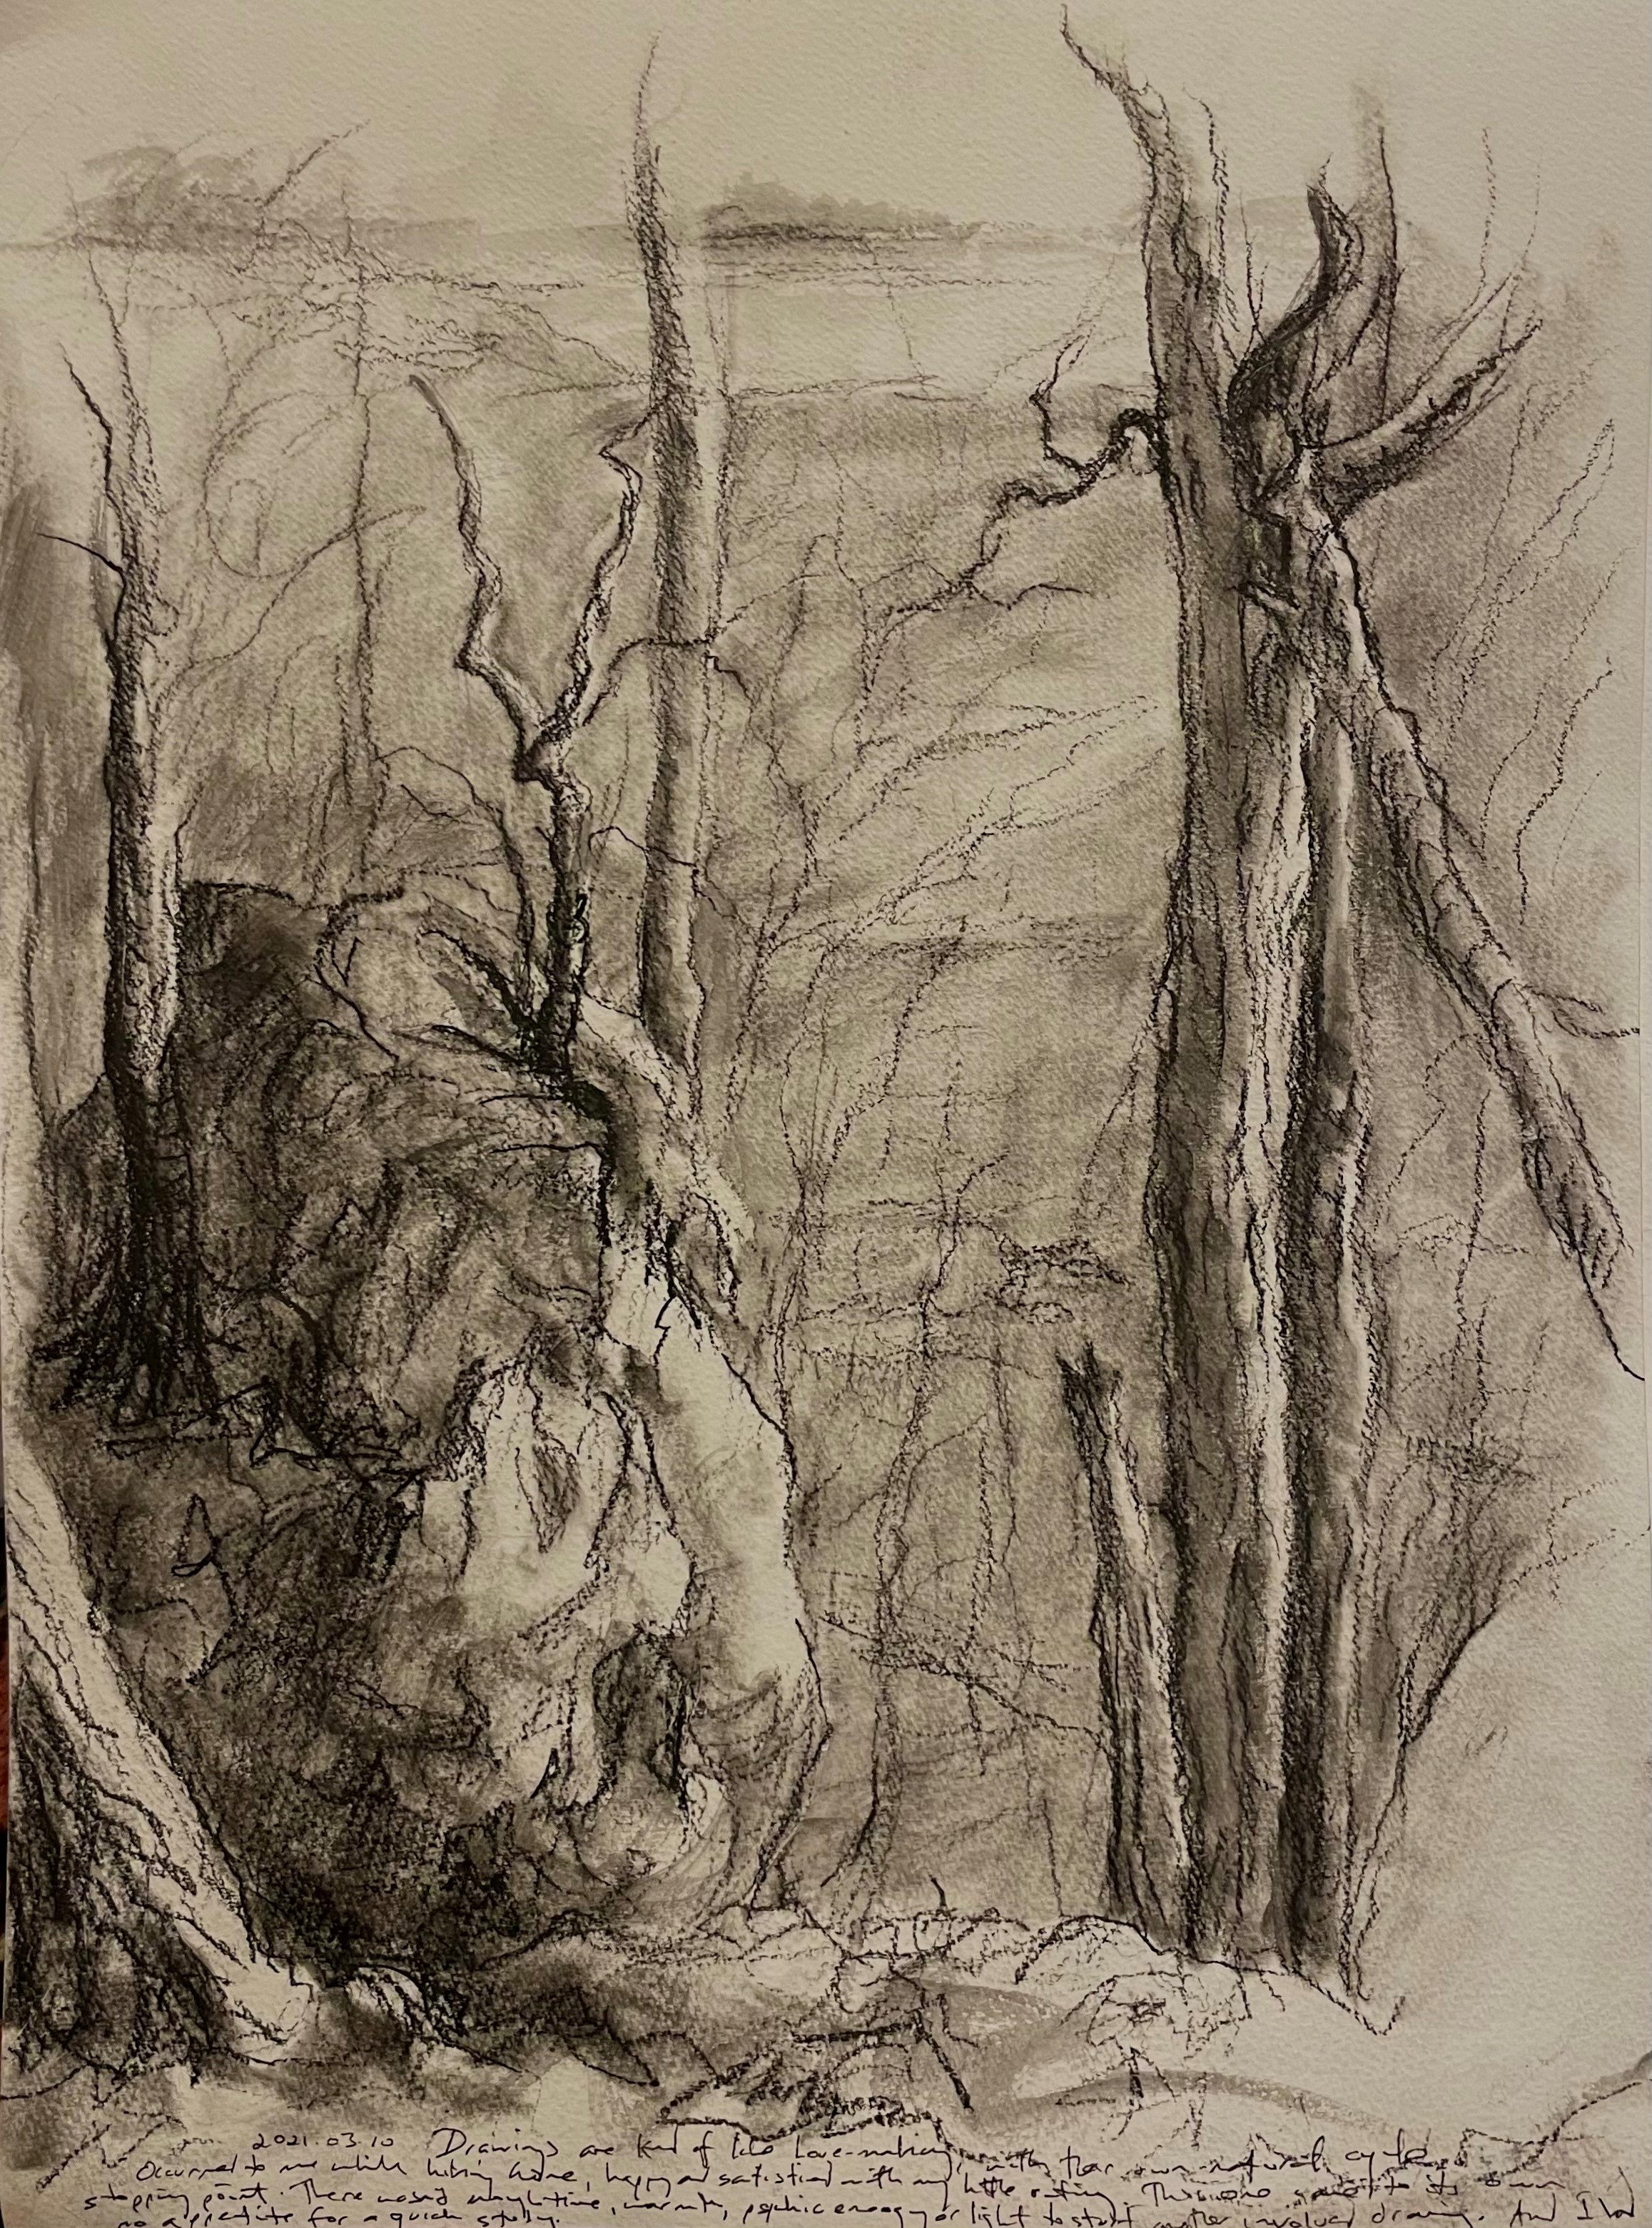 21-03-010   Atop a Granite Knoll Knoll     Charcoal on Paper     12 x 16 inches.jpg